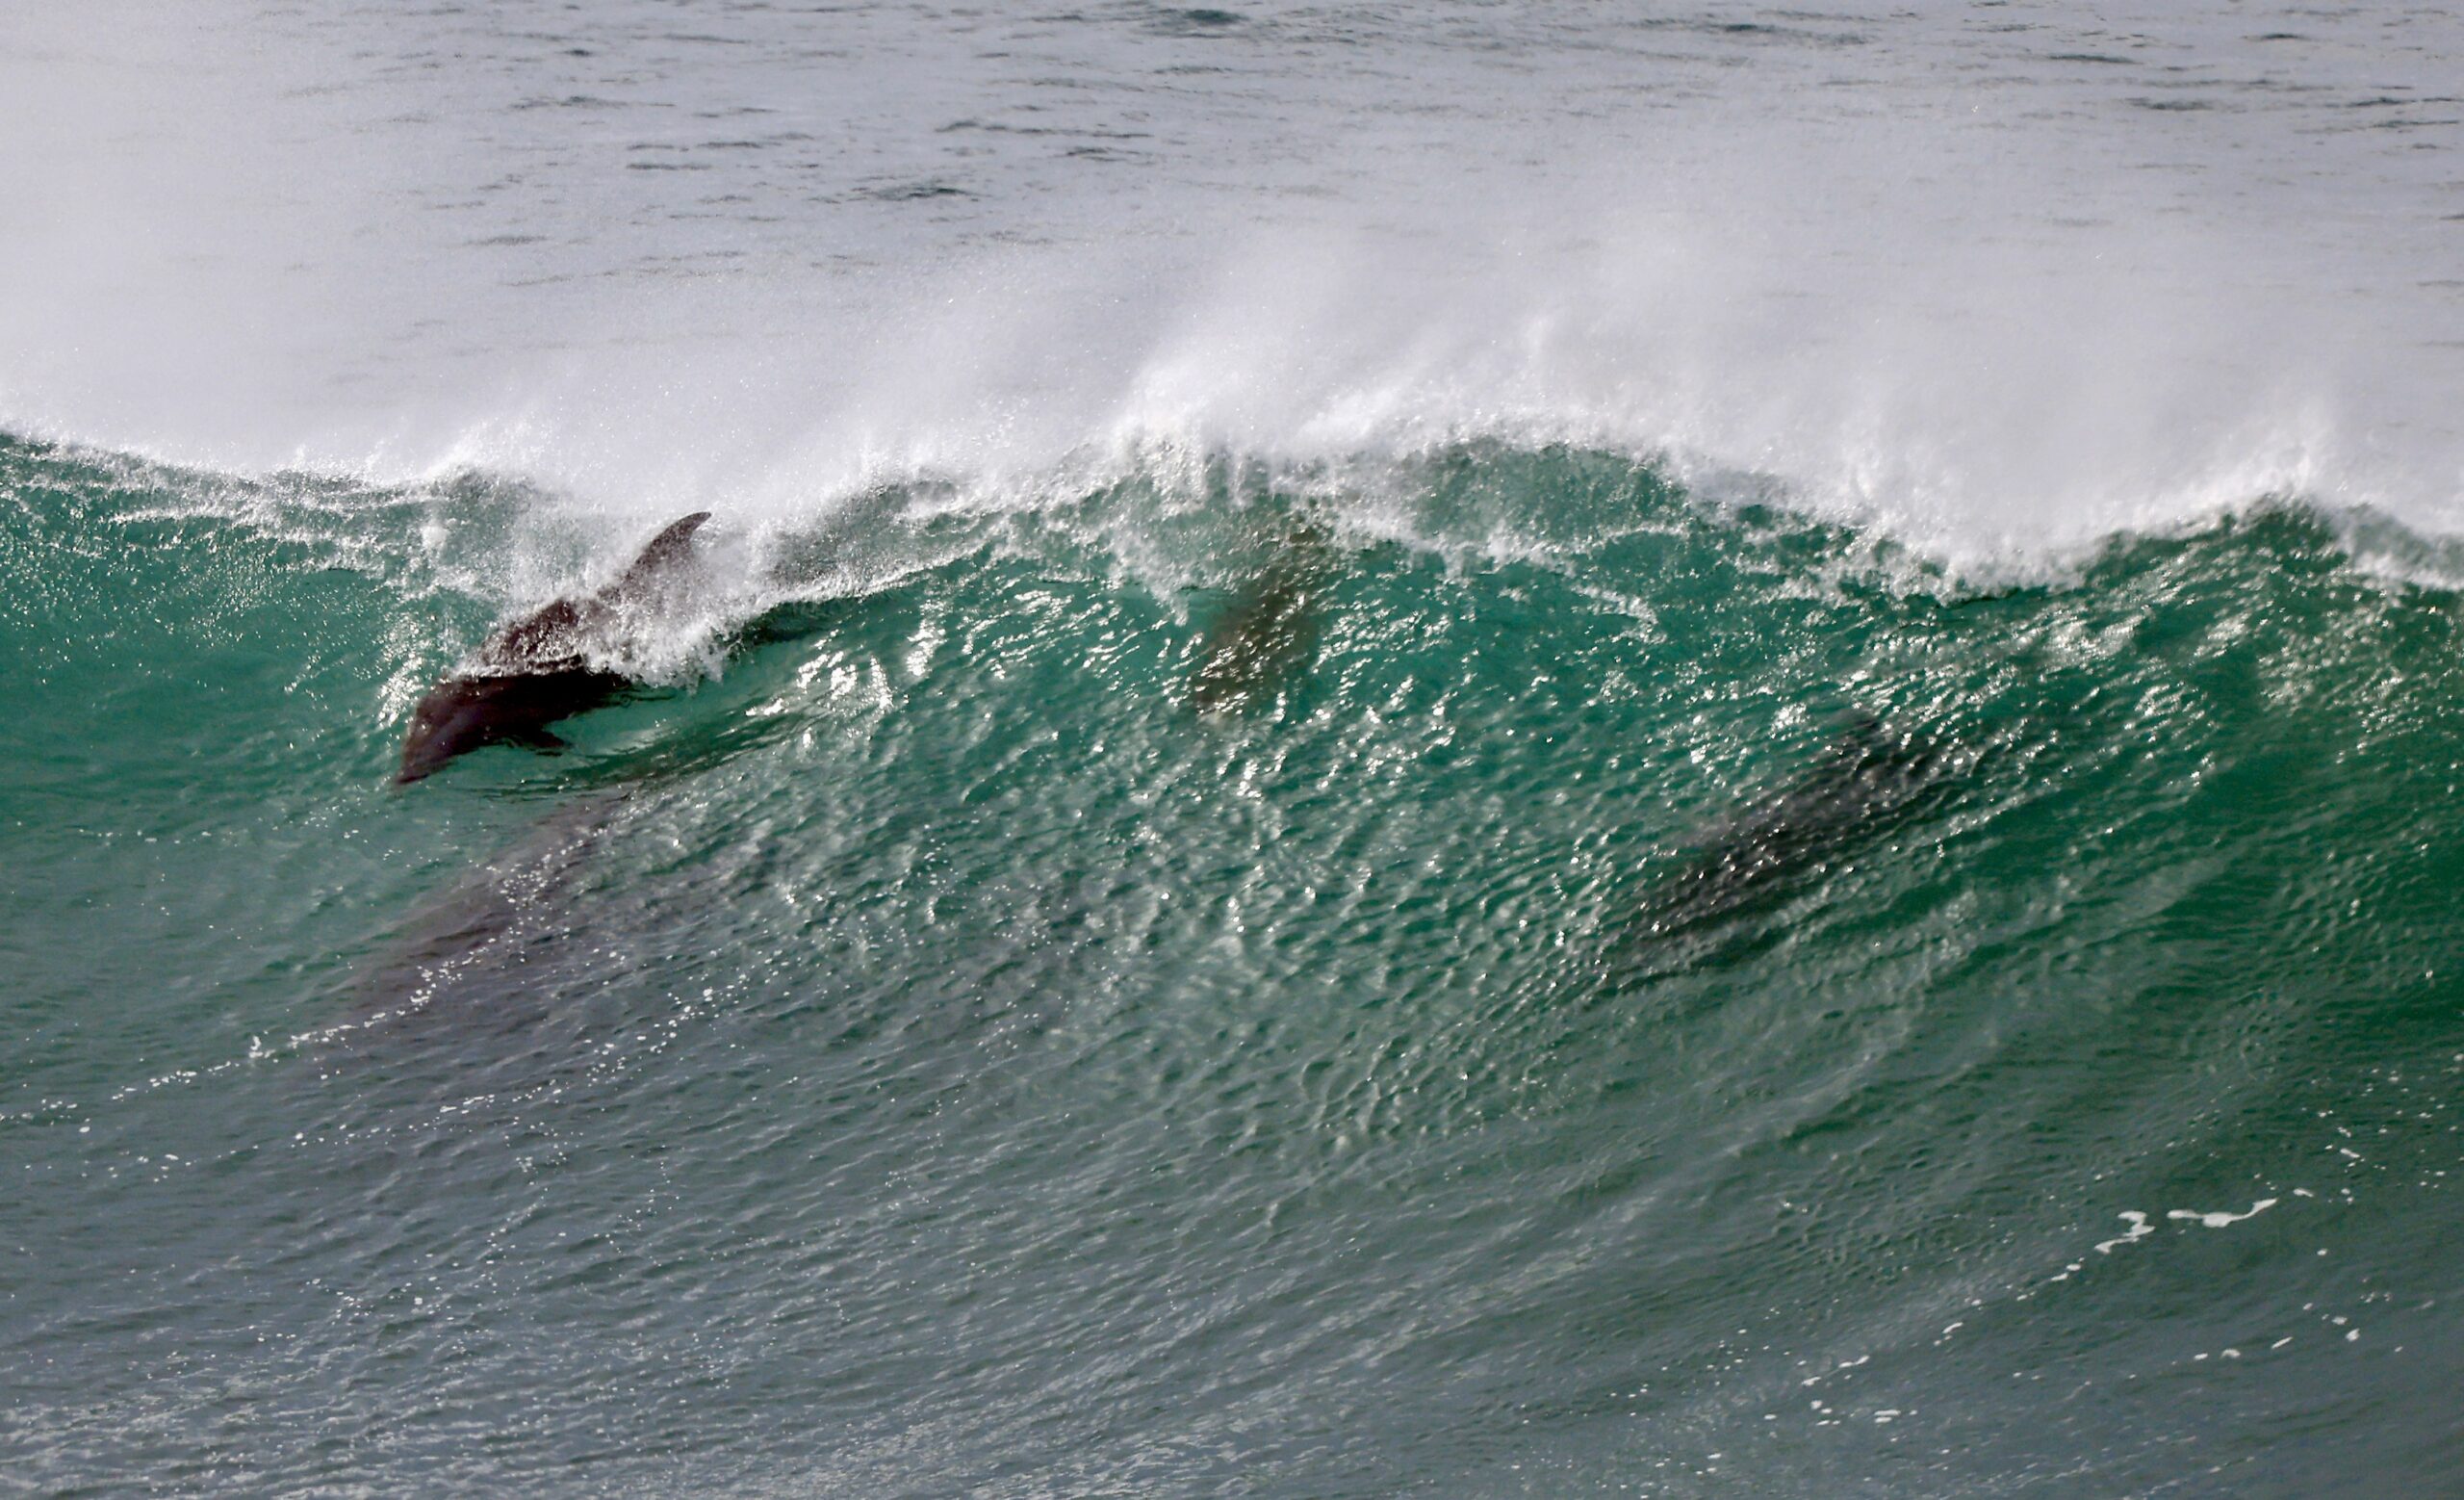 Dolphins are a not-uncommon sight in the waves off Doran Beach. (Kent Porter/The Press Democrat)